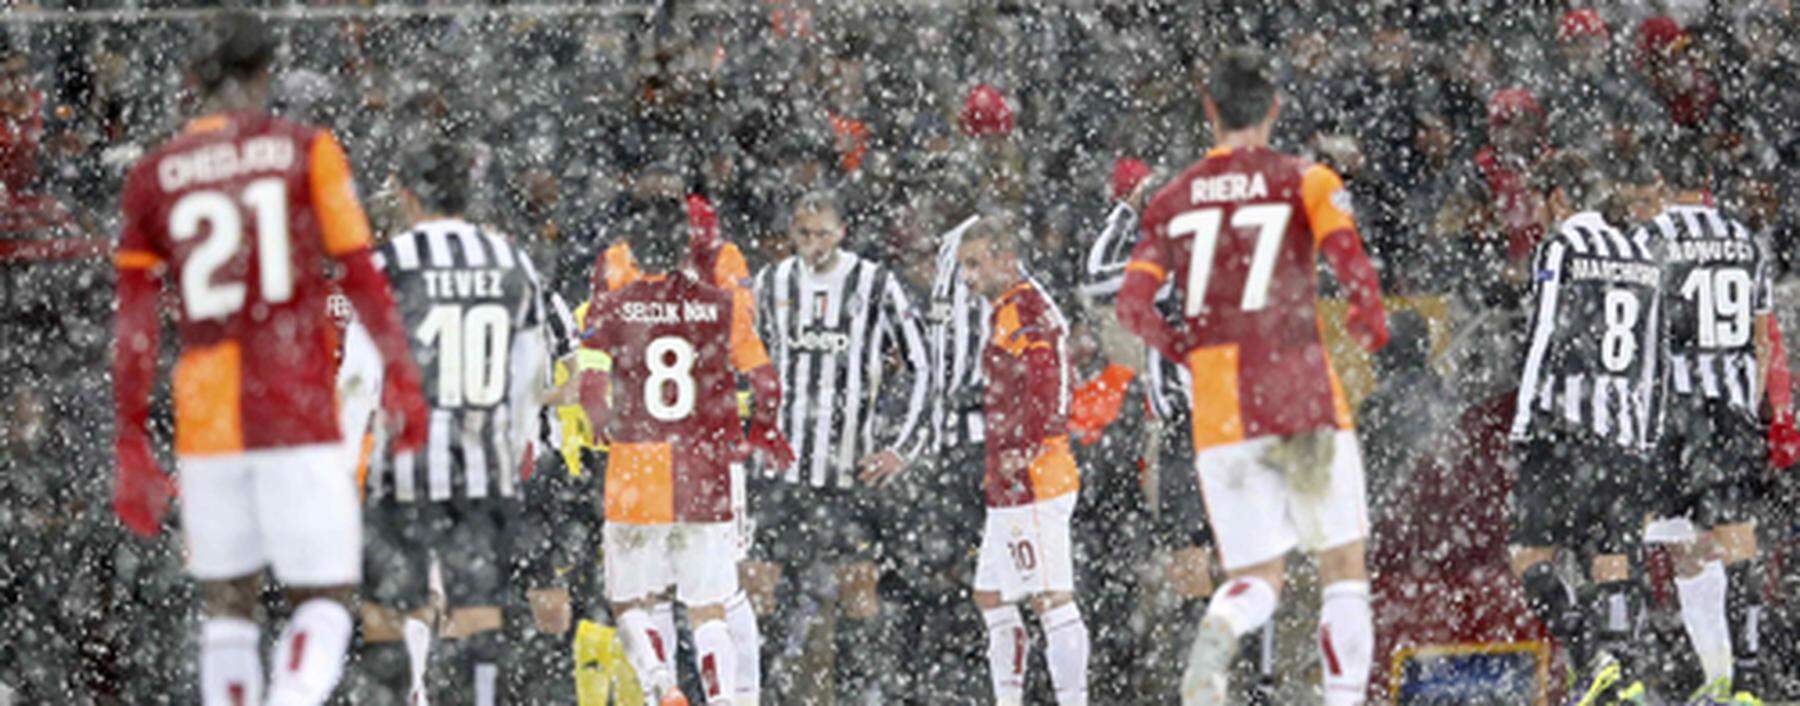 Players of Galatasaray and Juventus walk out of the pitch as their match is paused for 20 minutes due a heavy snowfall during their Champions League soccer match in Istanbul